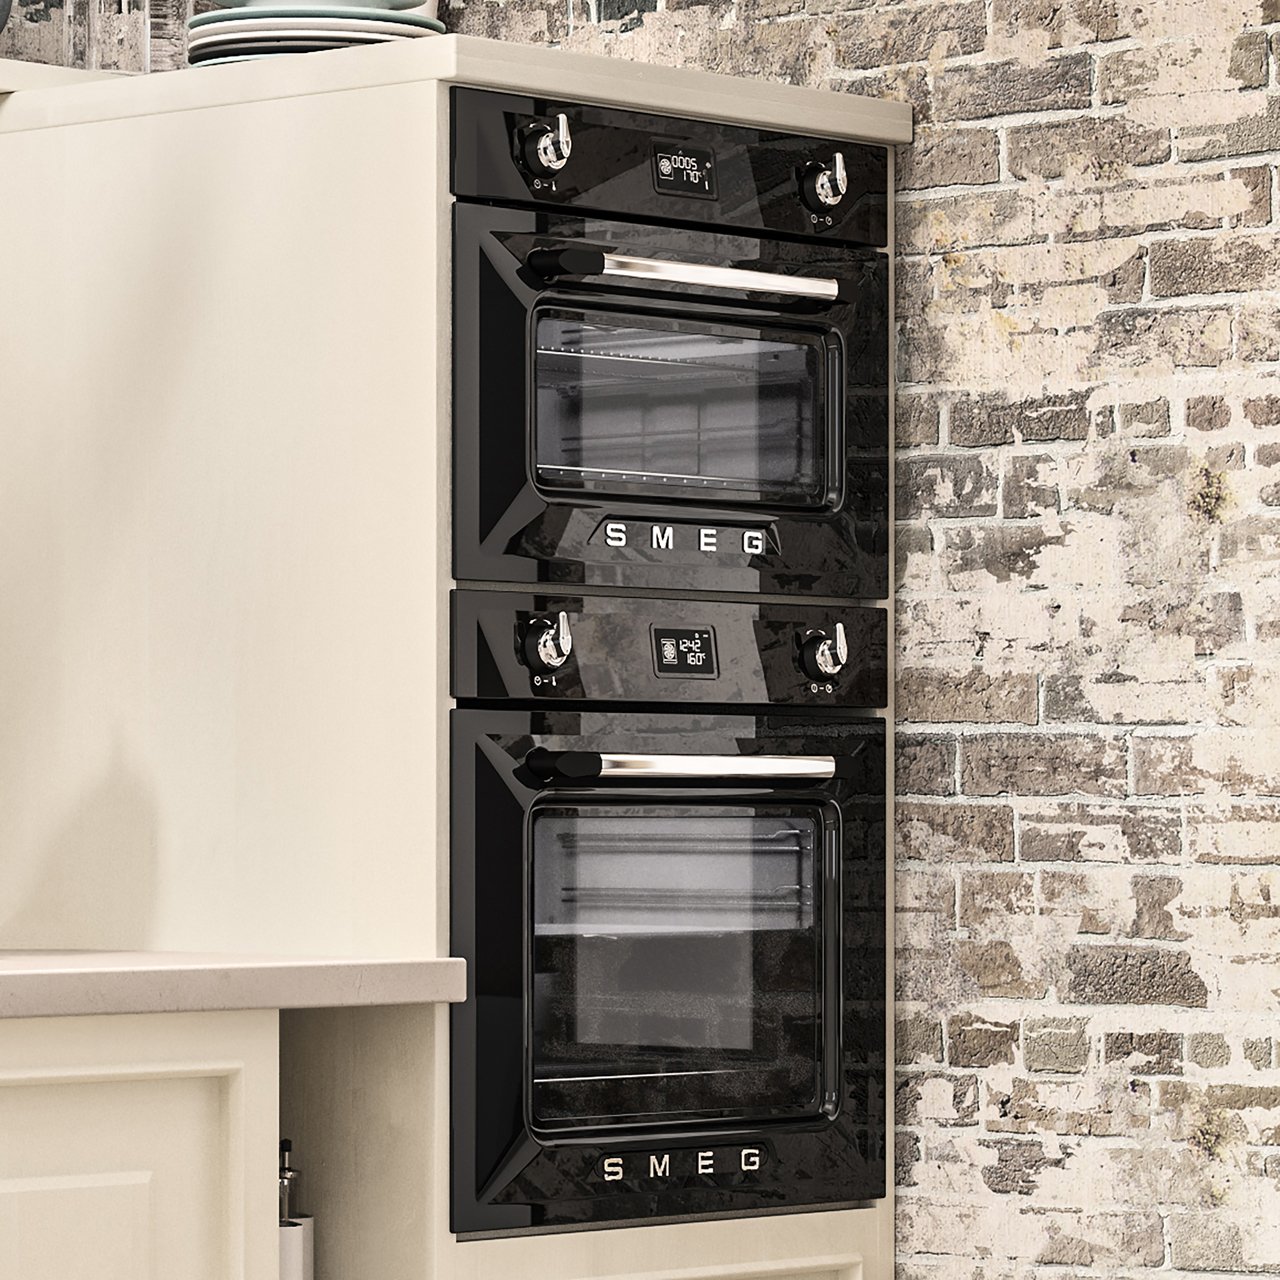  Smeg  SFP6925PPZE1 60cm Victoria Traditional Pyrolytic Oven  